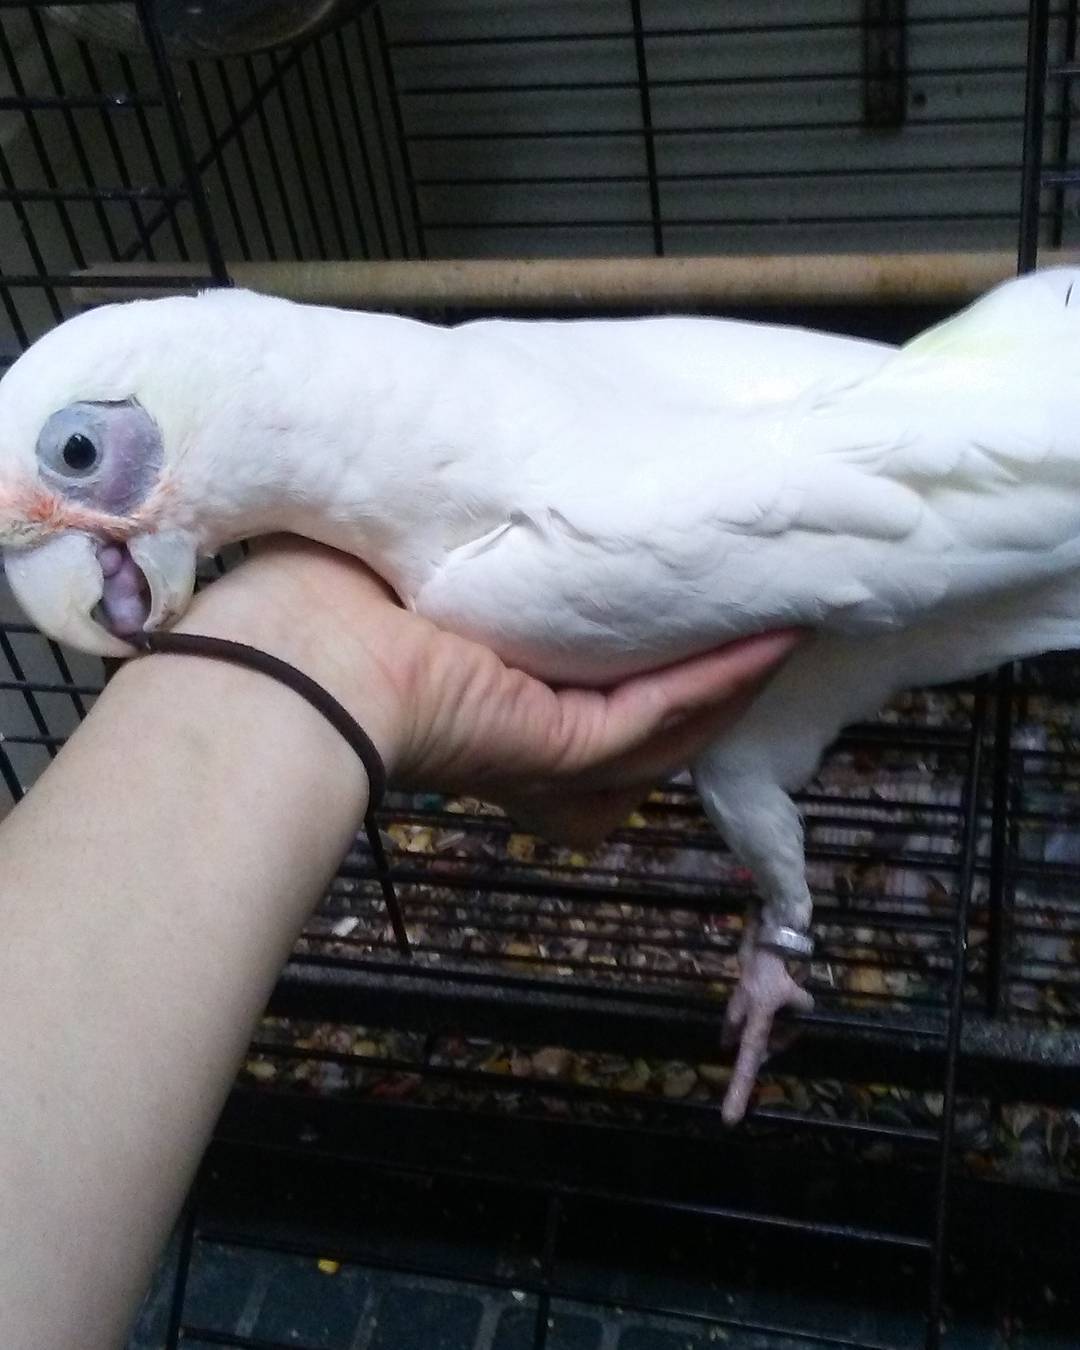 videos of a bare eyed cockatoo